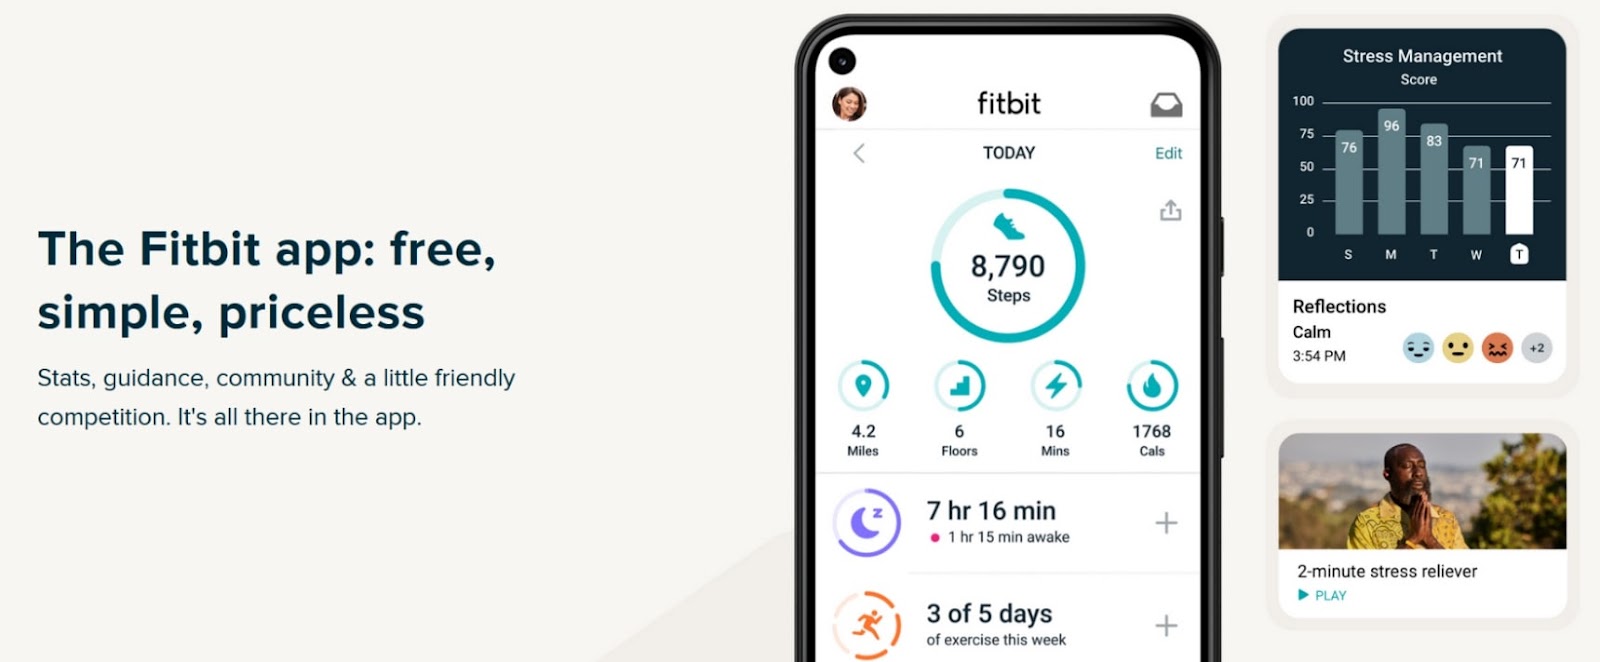 The Fitbit app landing page